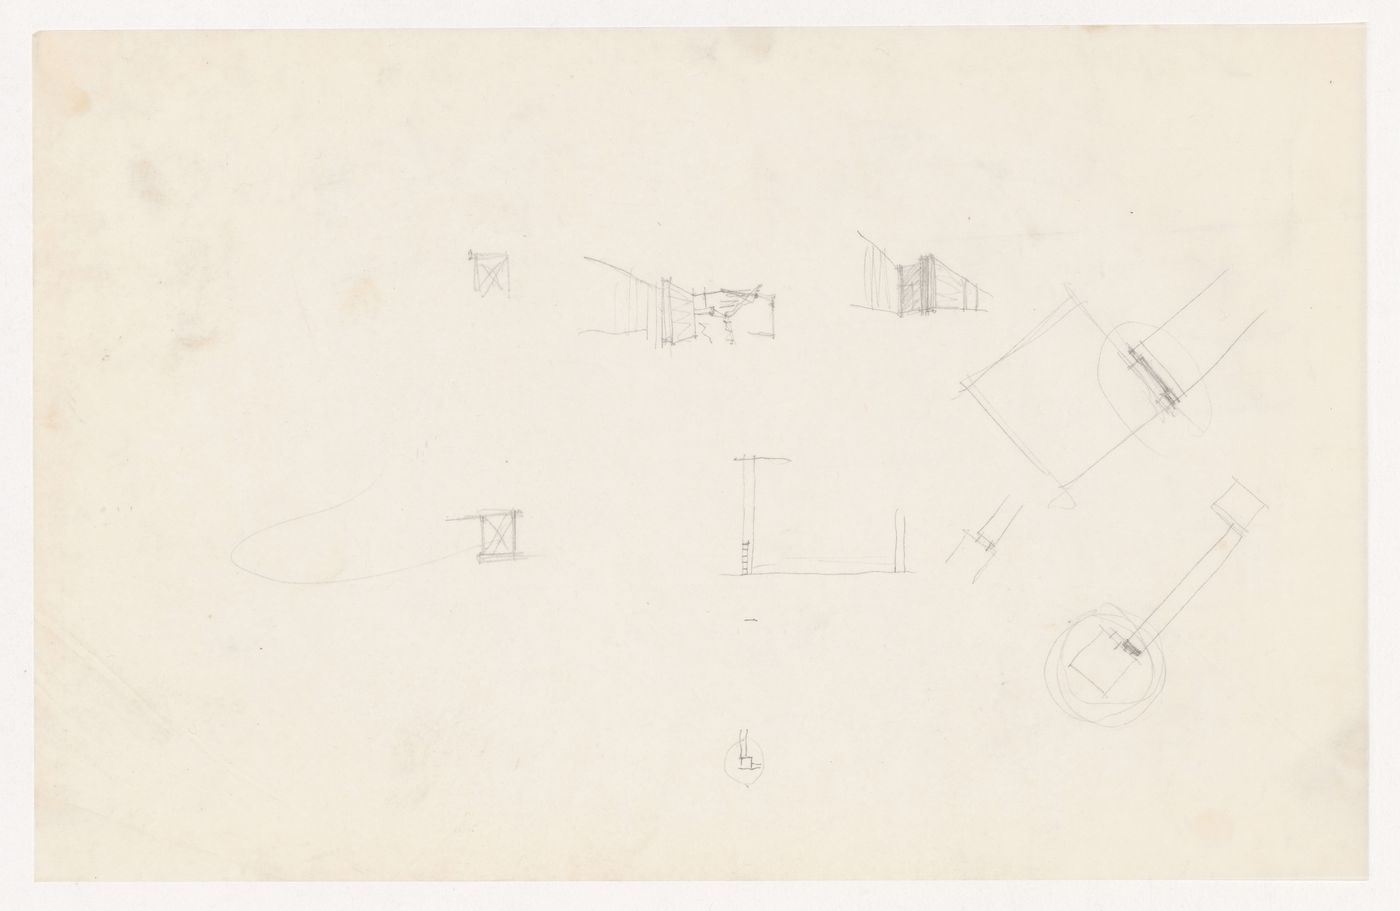 Interior perspective sketches and sketches, possibly sectional details, for the Metallurgy Building, Illinois Institute of Technology, Chicago